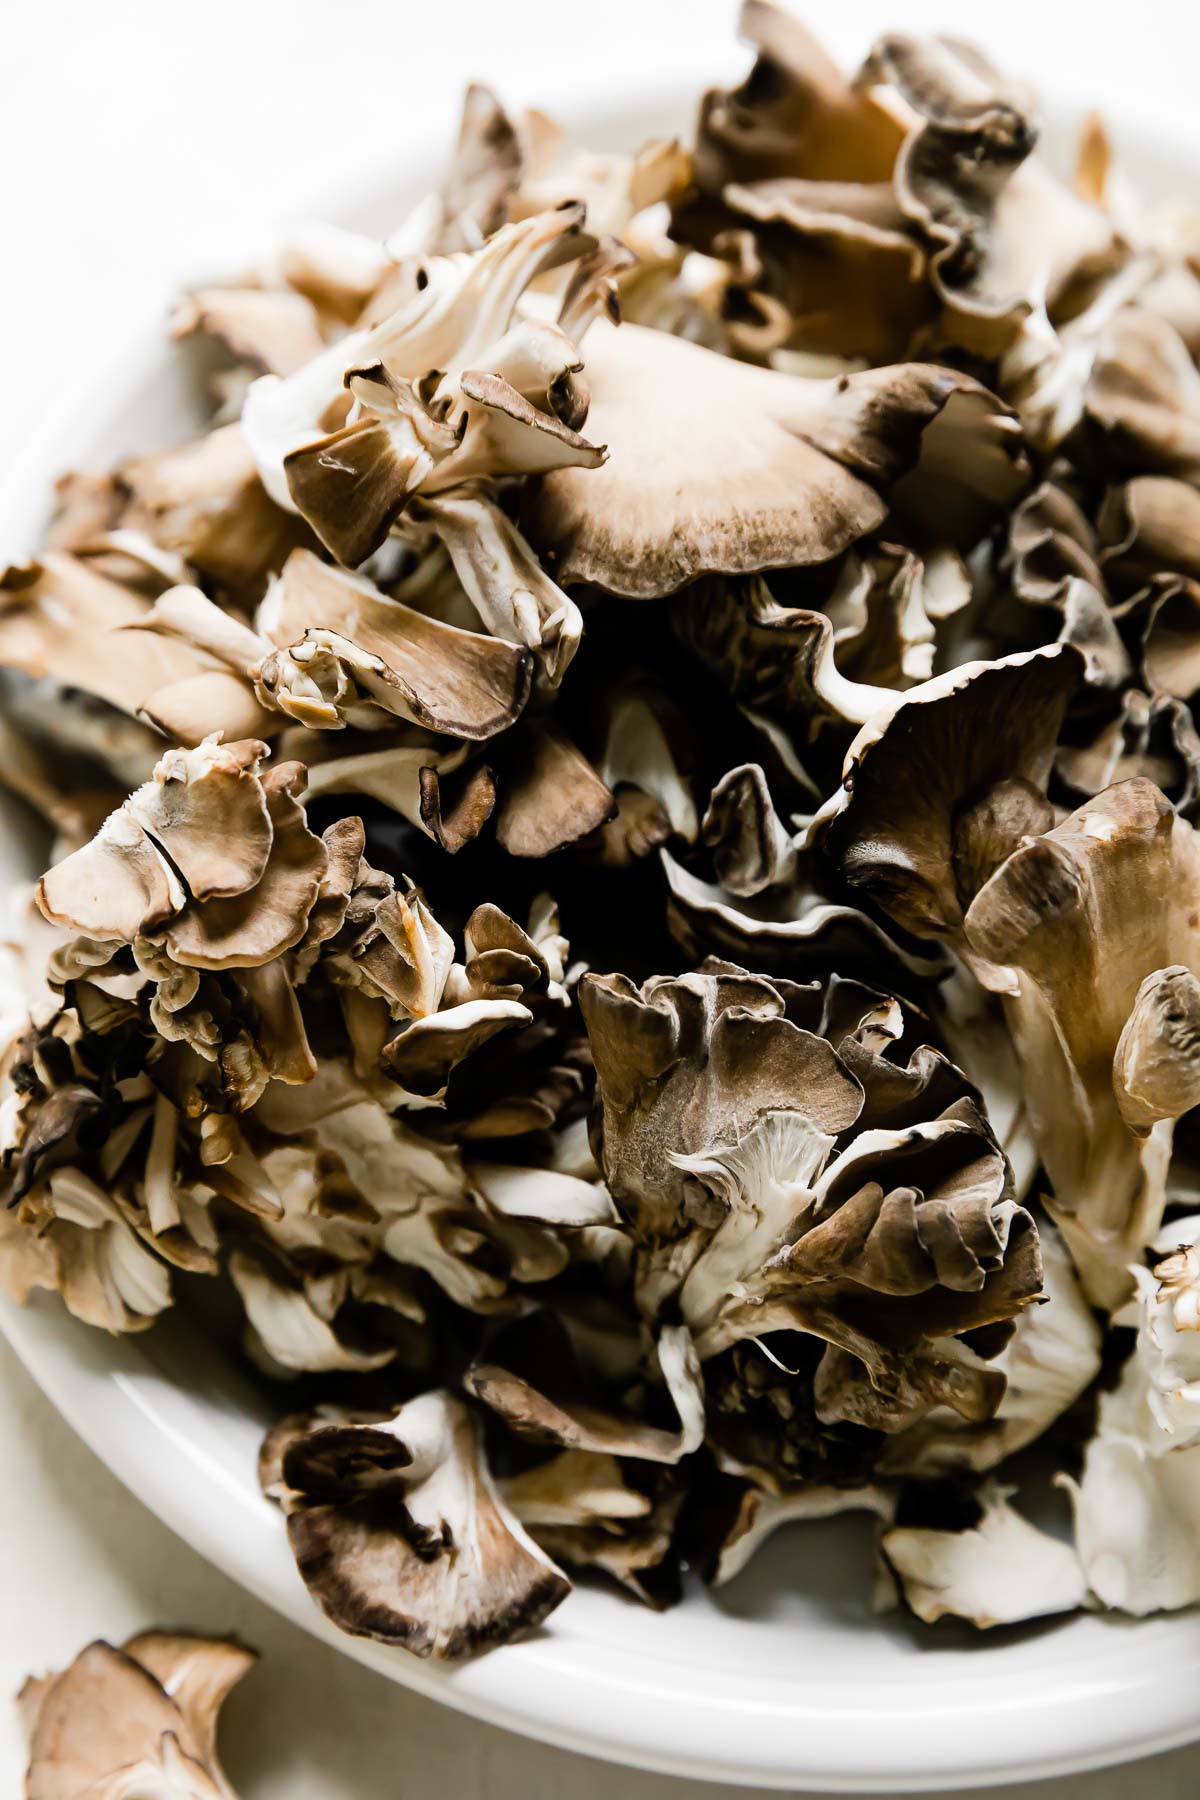 Torn maitake mushrooms are piled atop a white ceramic plate that sits atop a creamy white textured surface.